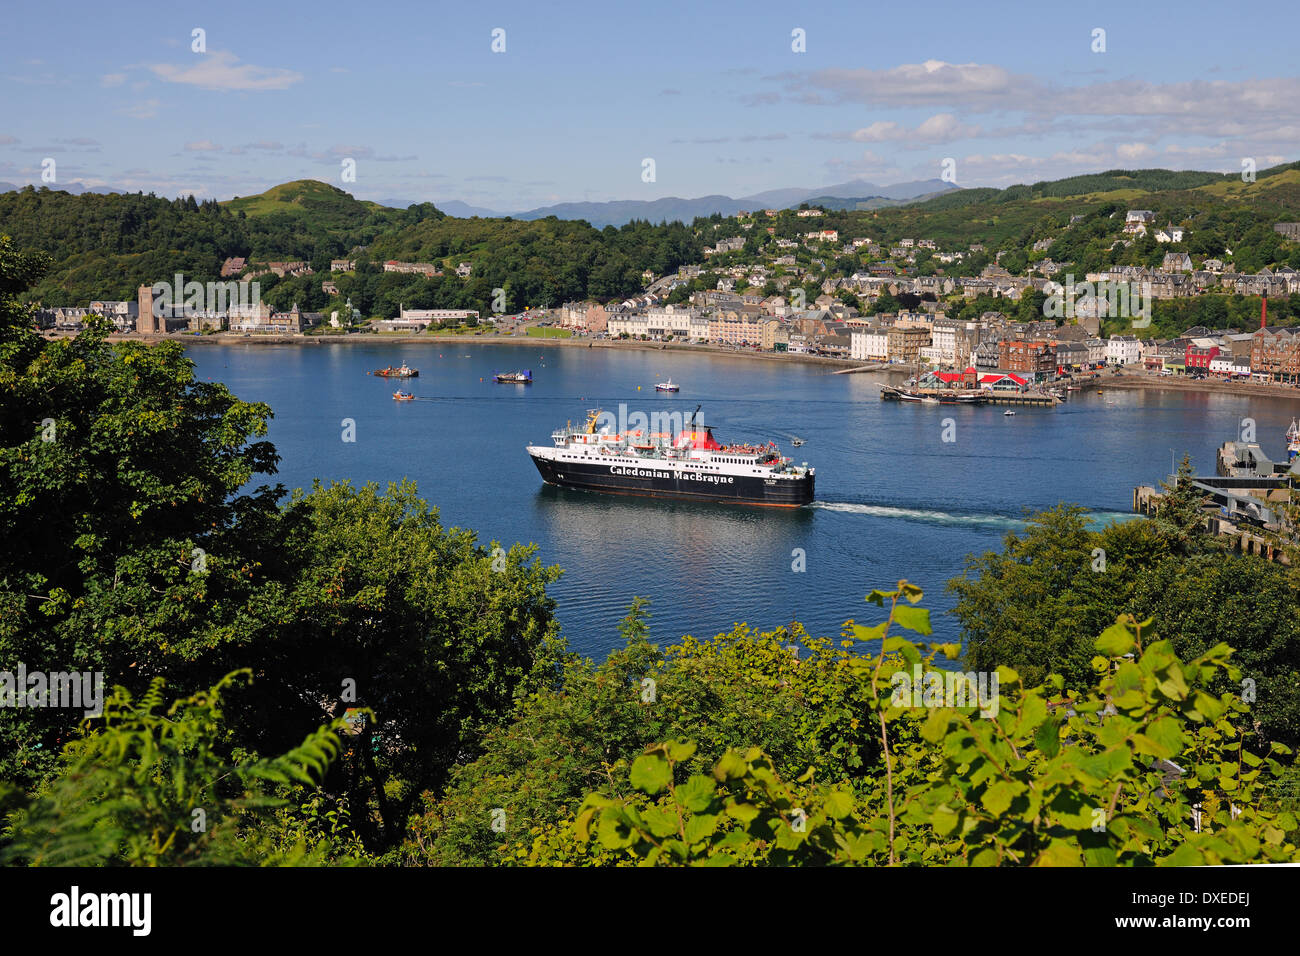 The Mull ferry departs oban bay as seen from Pulpit hill,Oban,Argyll Stock Photo